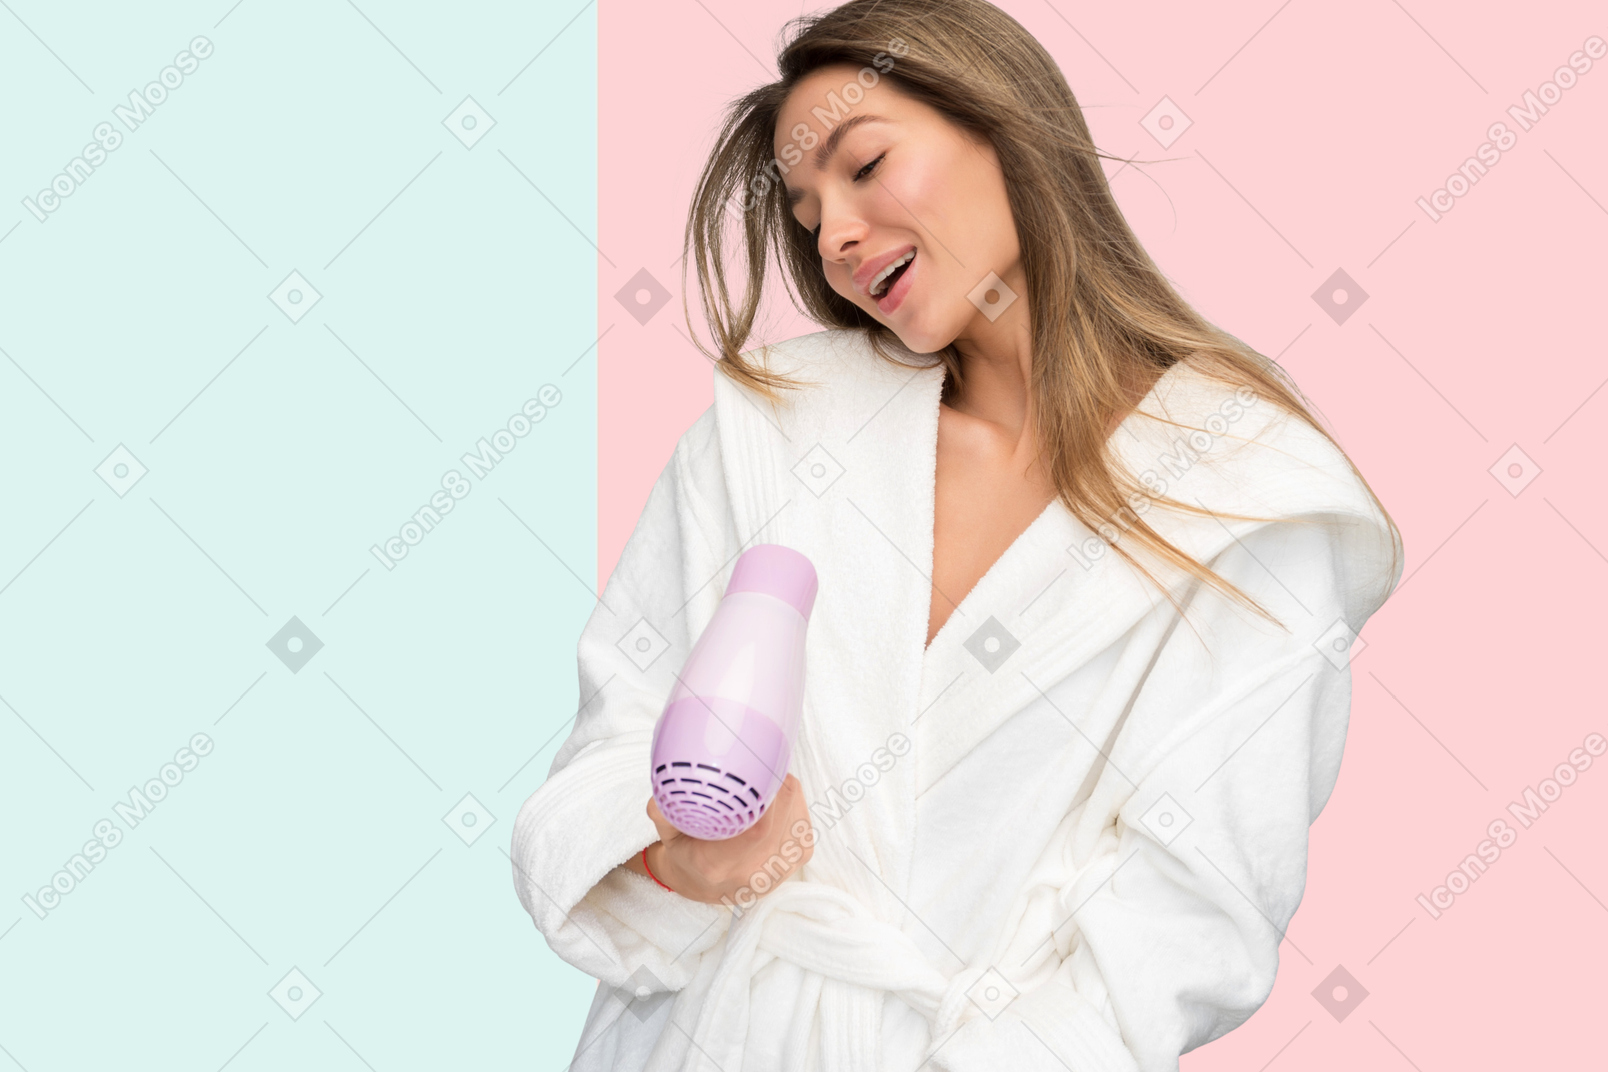 Young woman drying her hair with a hairdryer